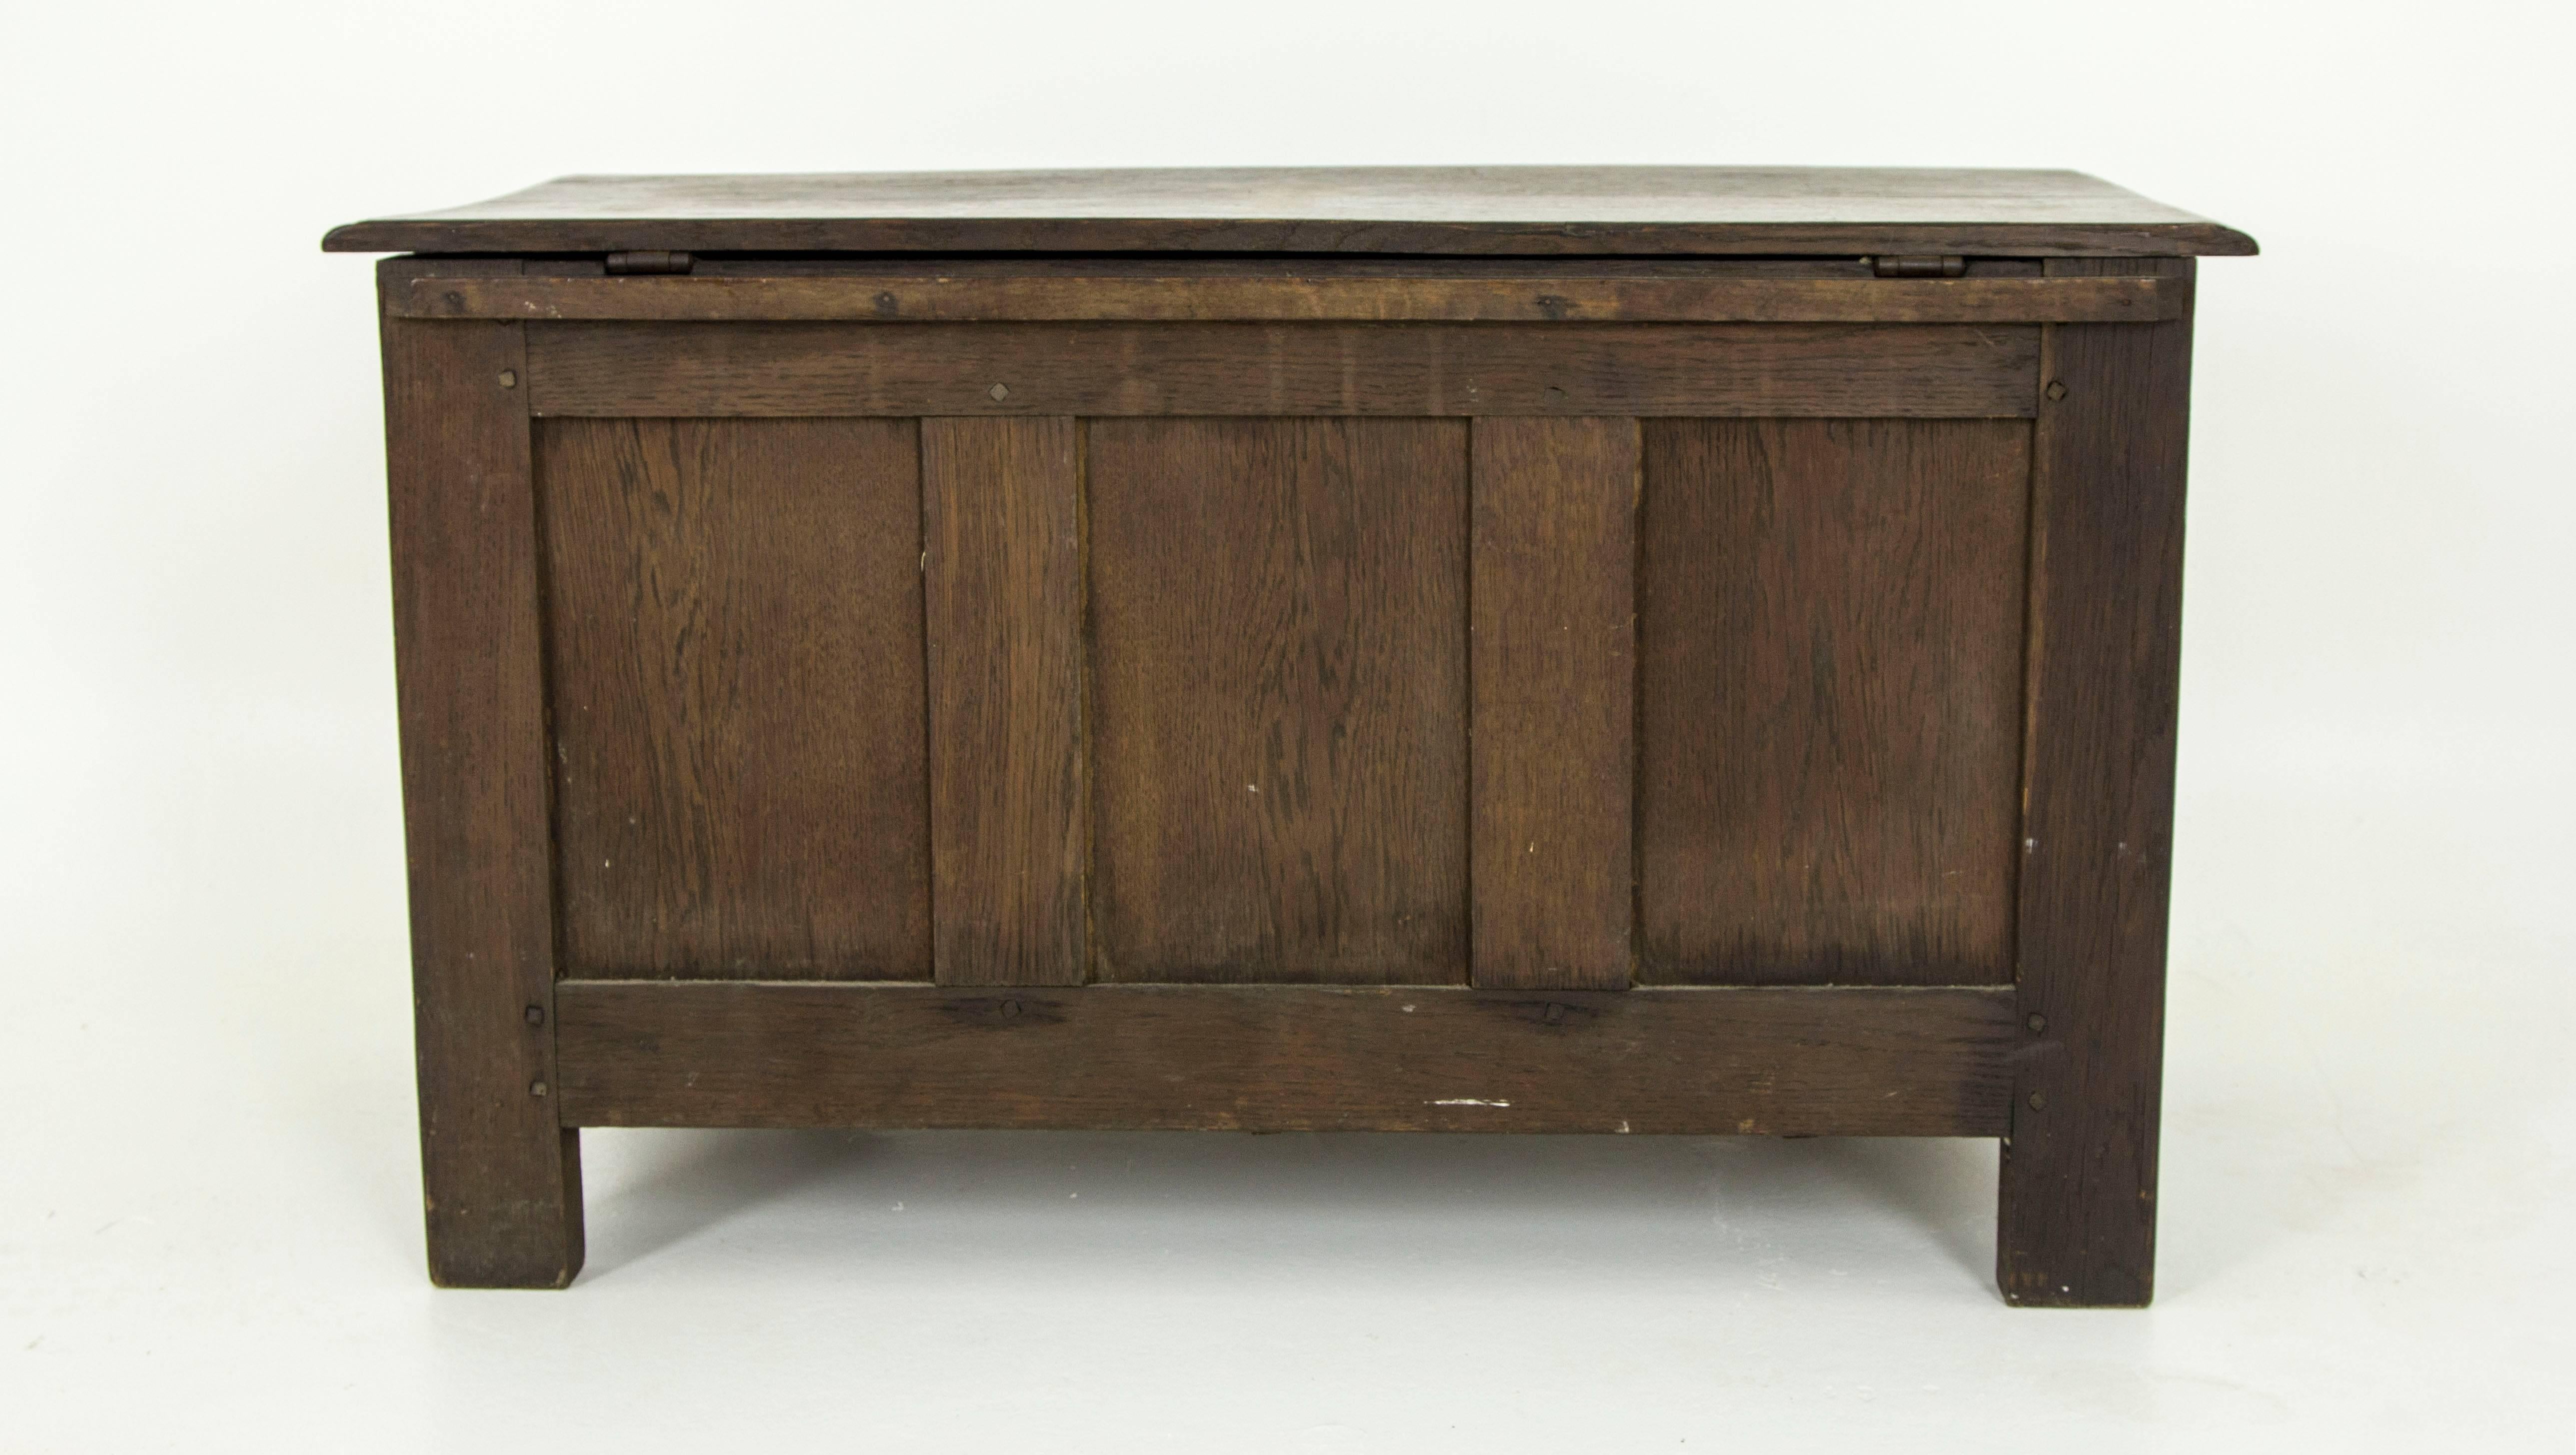 This antique oak blanket box was hand-carved in oak nearly 150 years ago. This is an heirloom quality chest that is bound to be an asset to any decor. 

Scotland, 1880
Solid oak construction
Original finish
Three panel front with carved top and